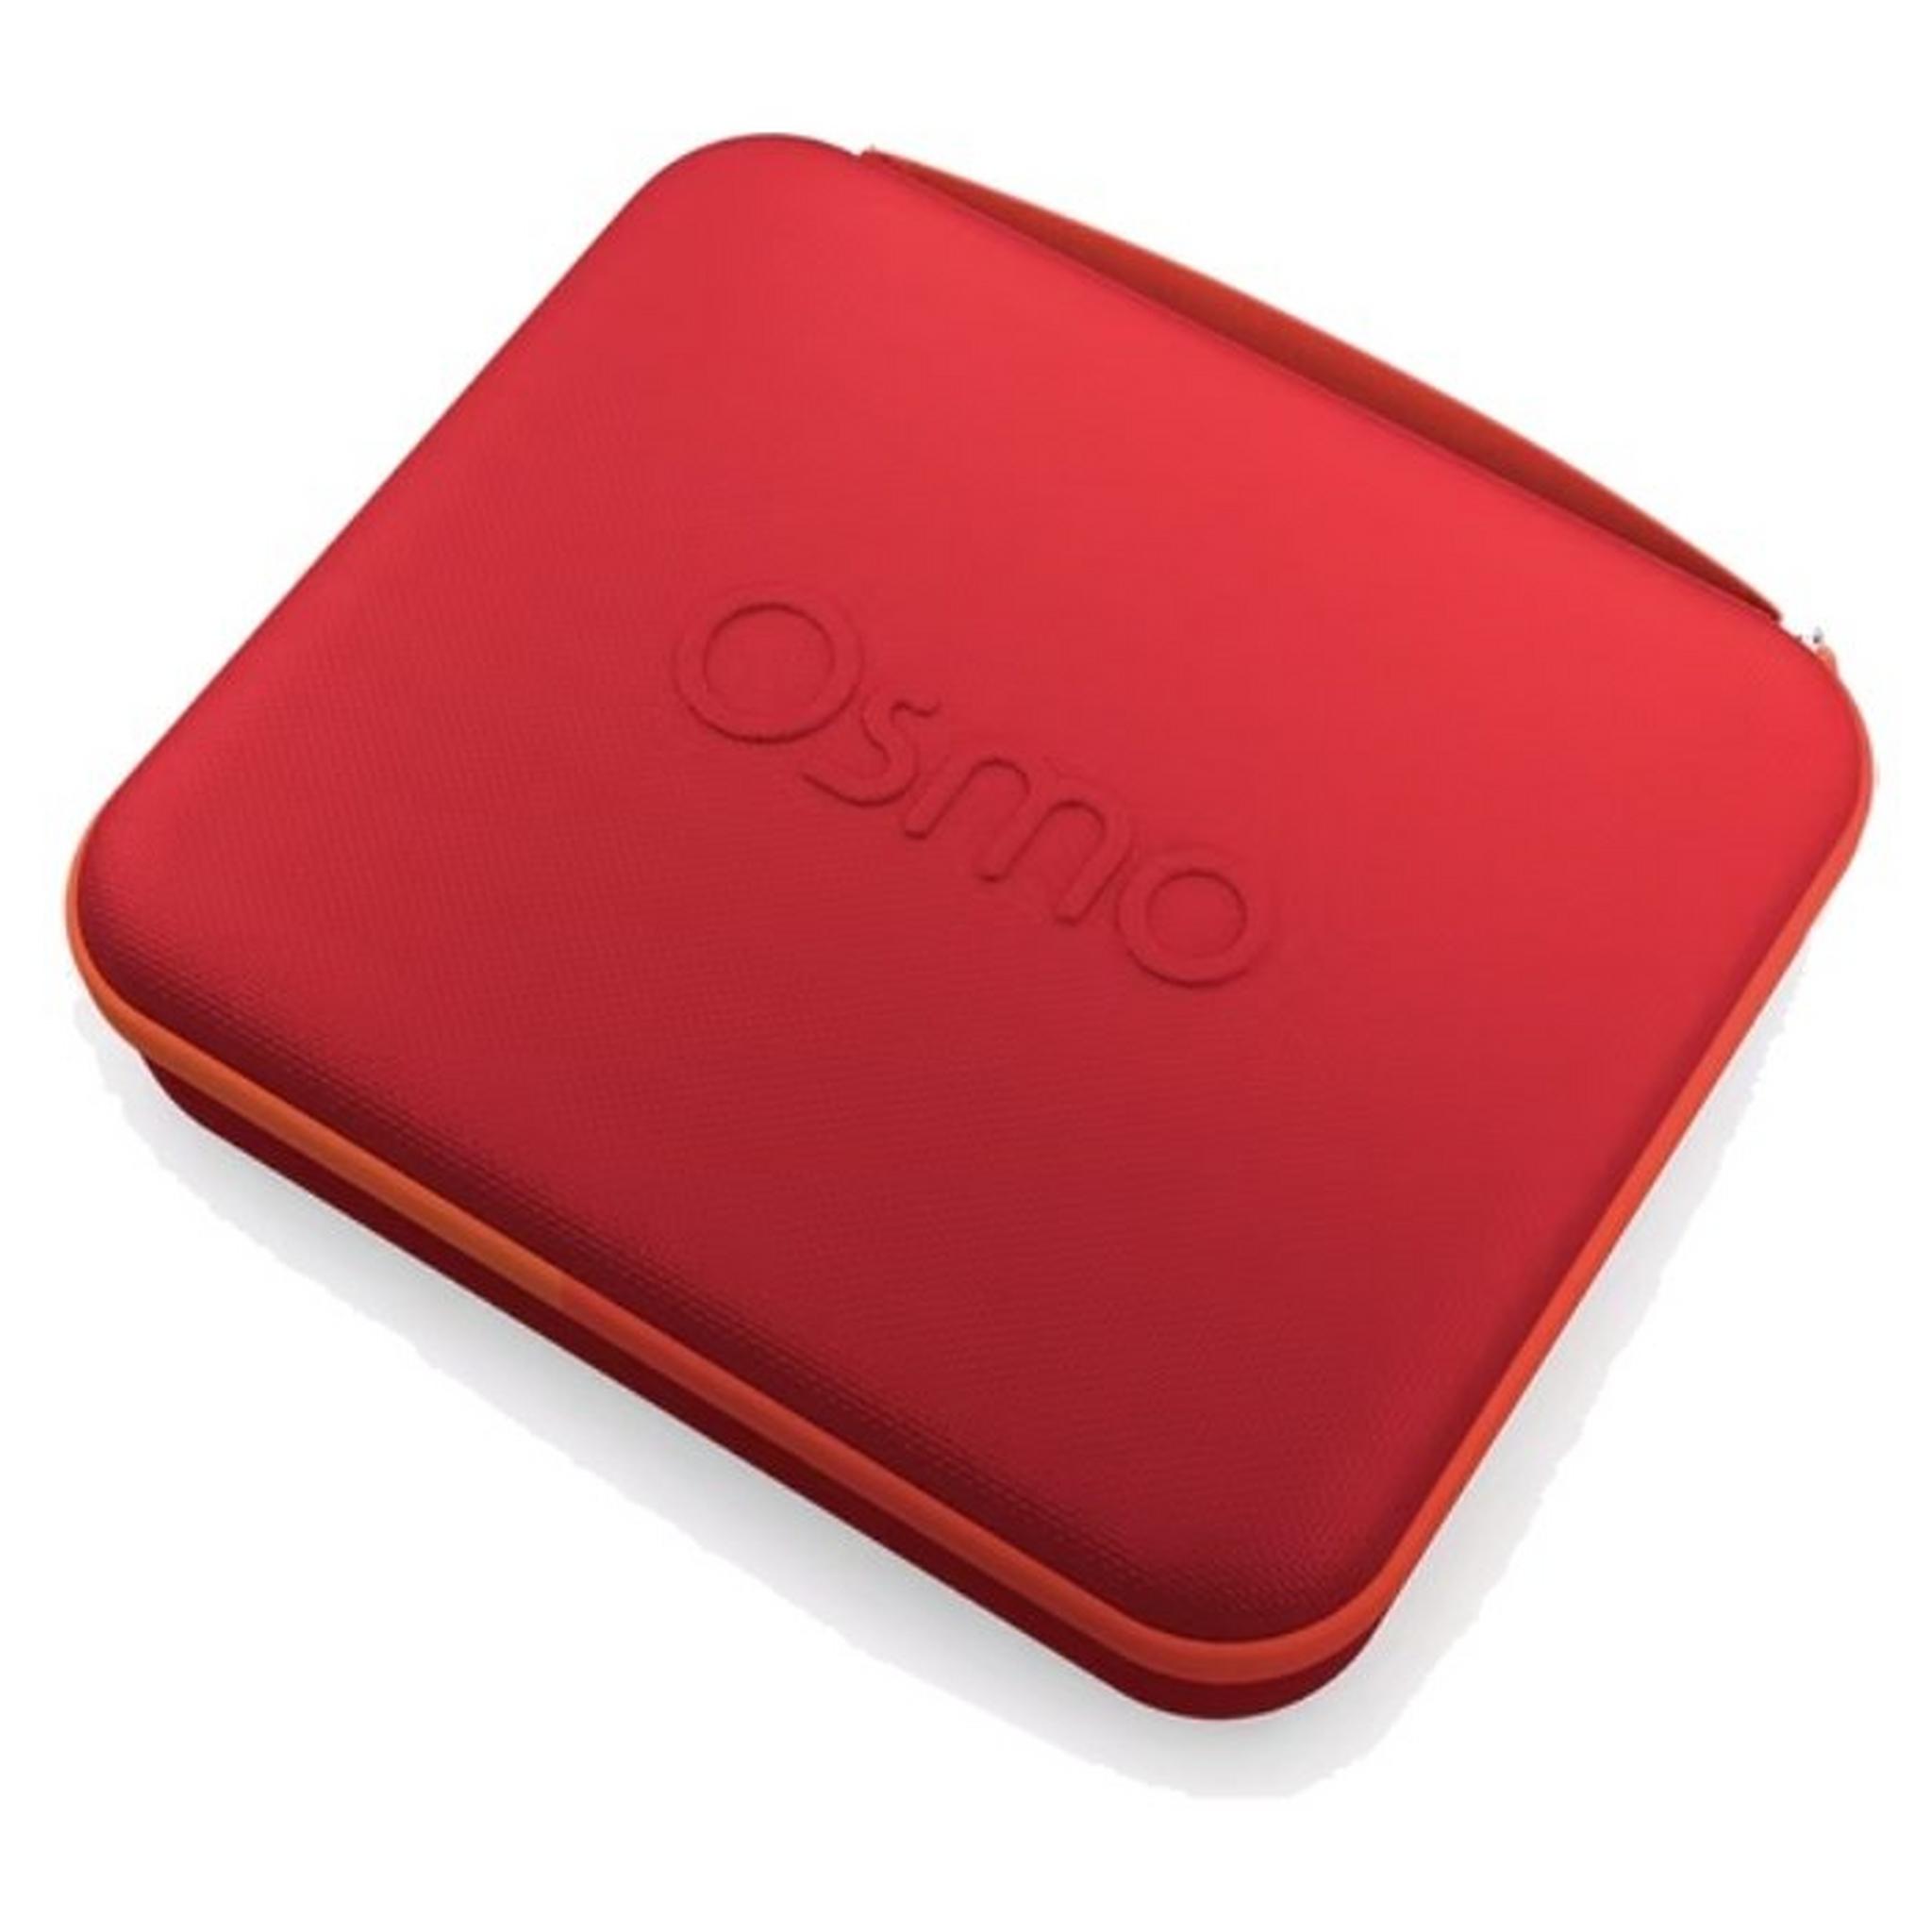 Osmo Large Carrying Case